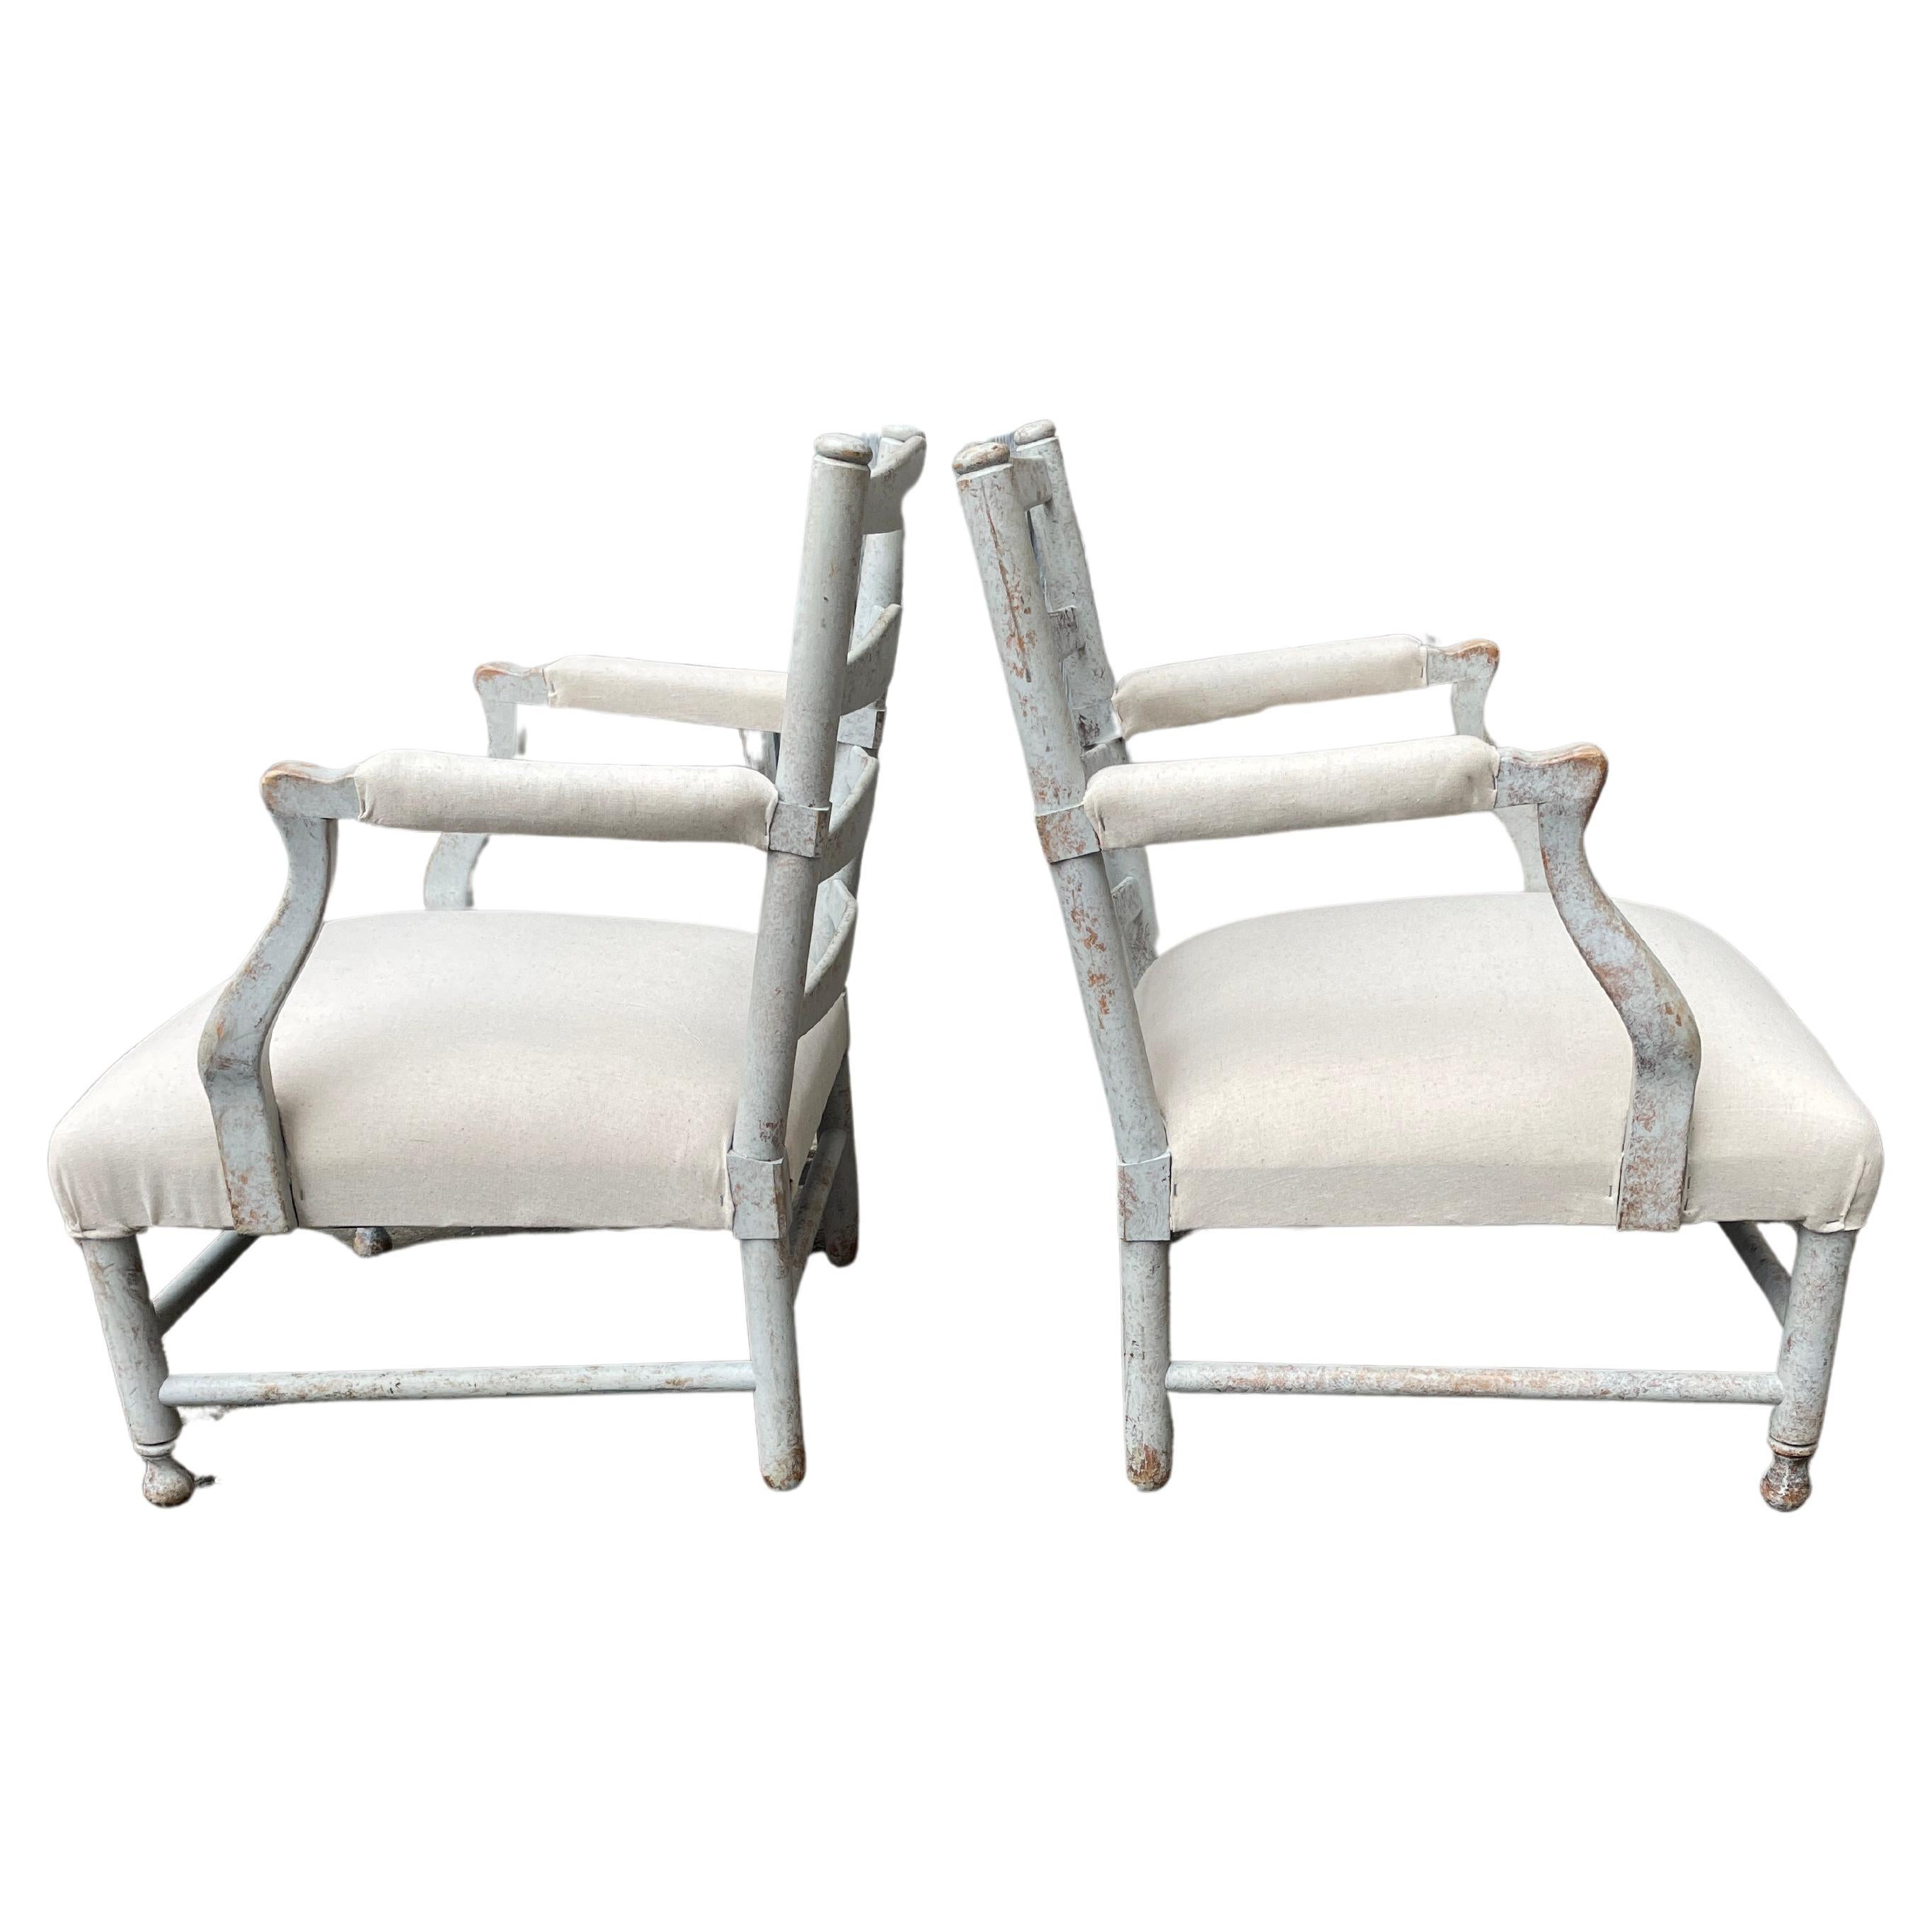 Scandinavian Gripsholm Painted Grey Armchairs, A Pair

A pair of elegant Swedish armchairs, modeled after the traditional Gripsholm type. The model is named after the Gripsholm castle, where King Gustav III used chairs of this type in the late 18th